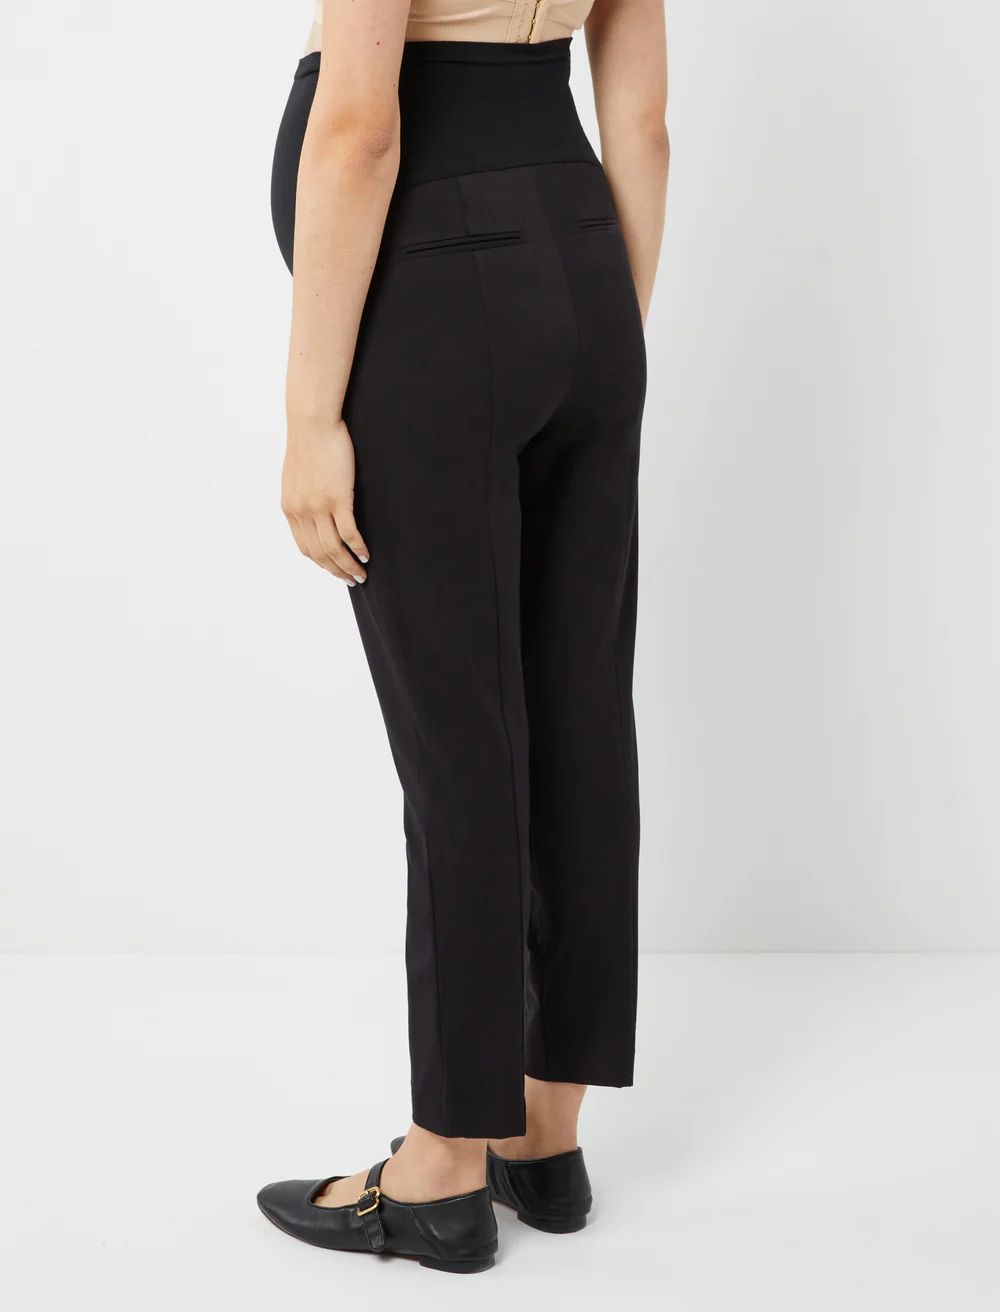 The Curie Secret Fit Belly Twill Slim Ankle Maternity Pant | Motherhood Maternity